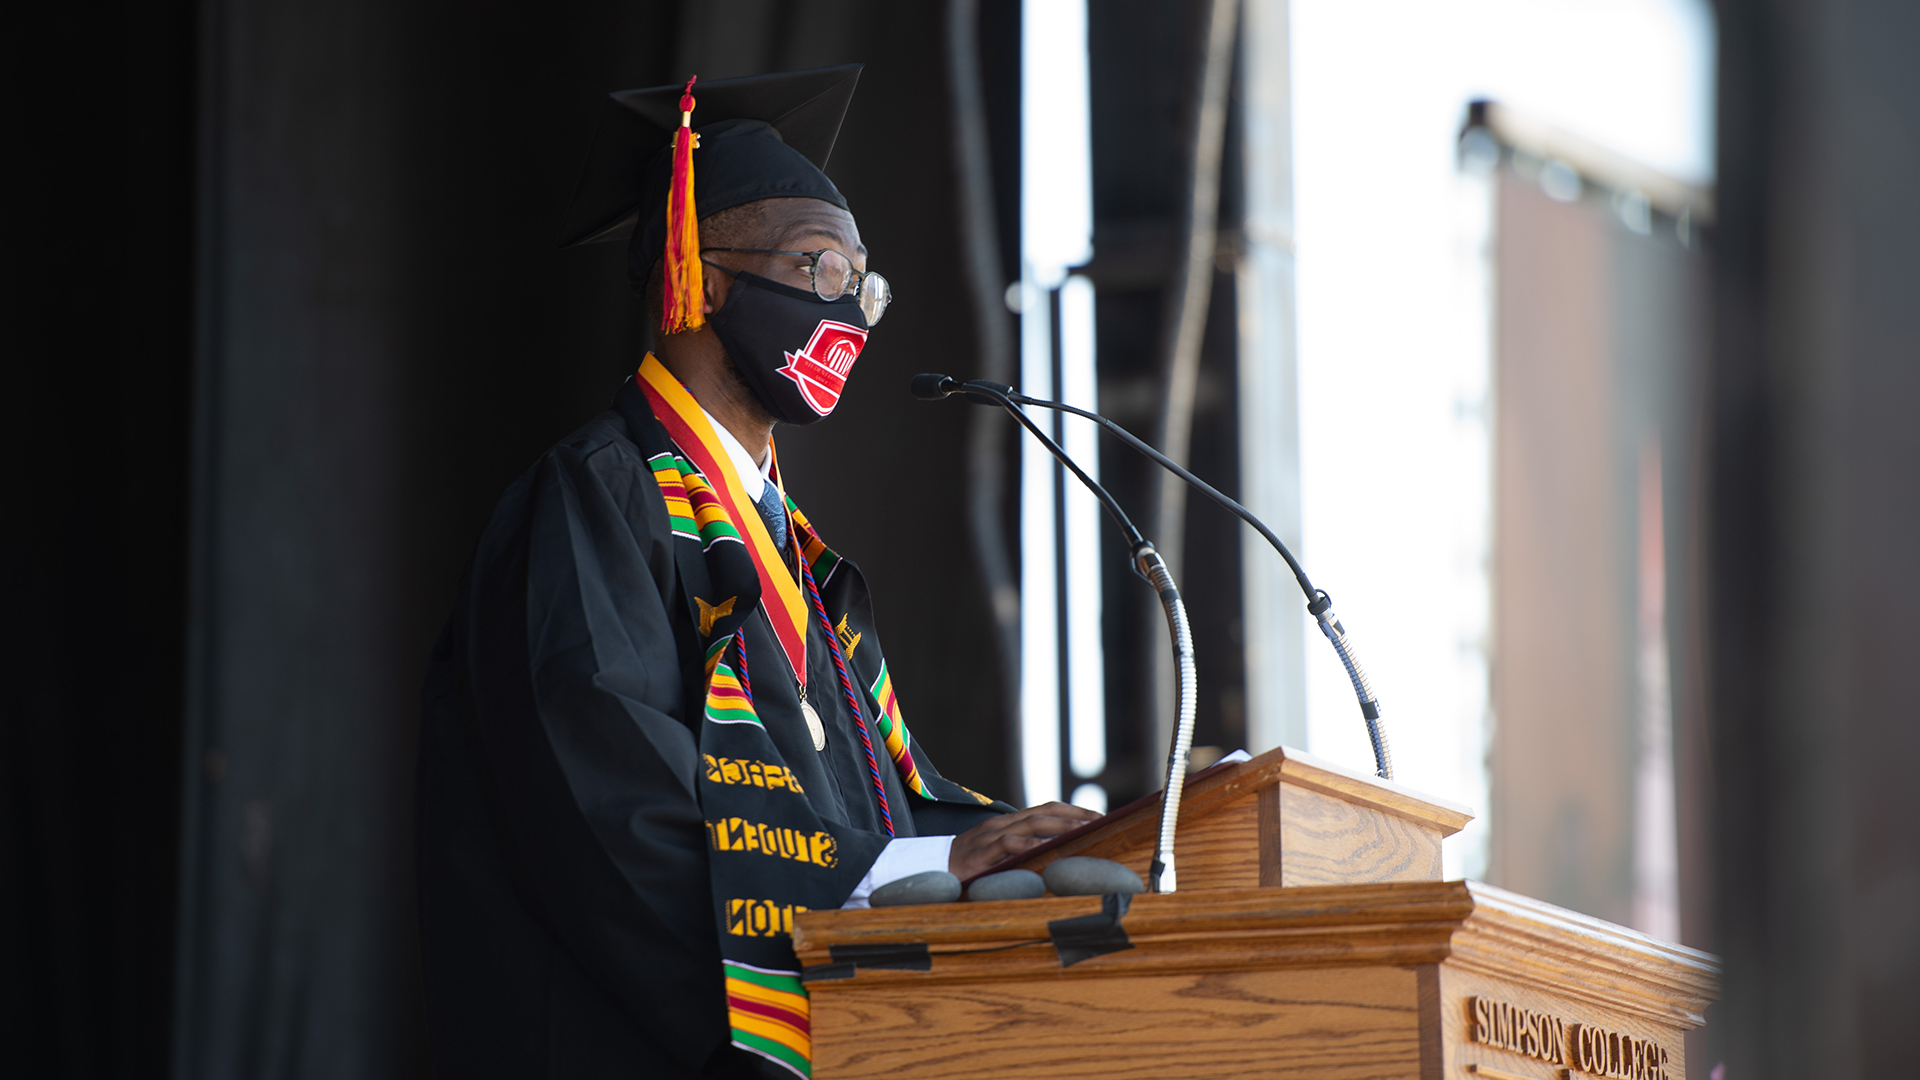 Simpson College graduate David Robinson ’21 delivers the traditional undergraduate address at the 2021 afternoon commencement ceremony.